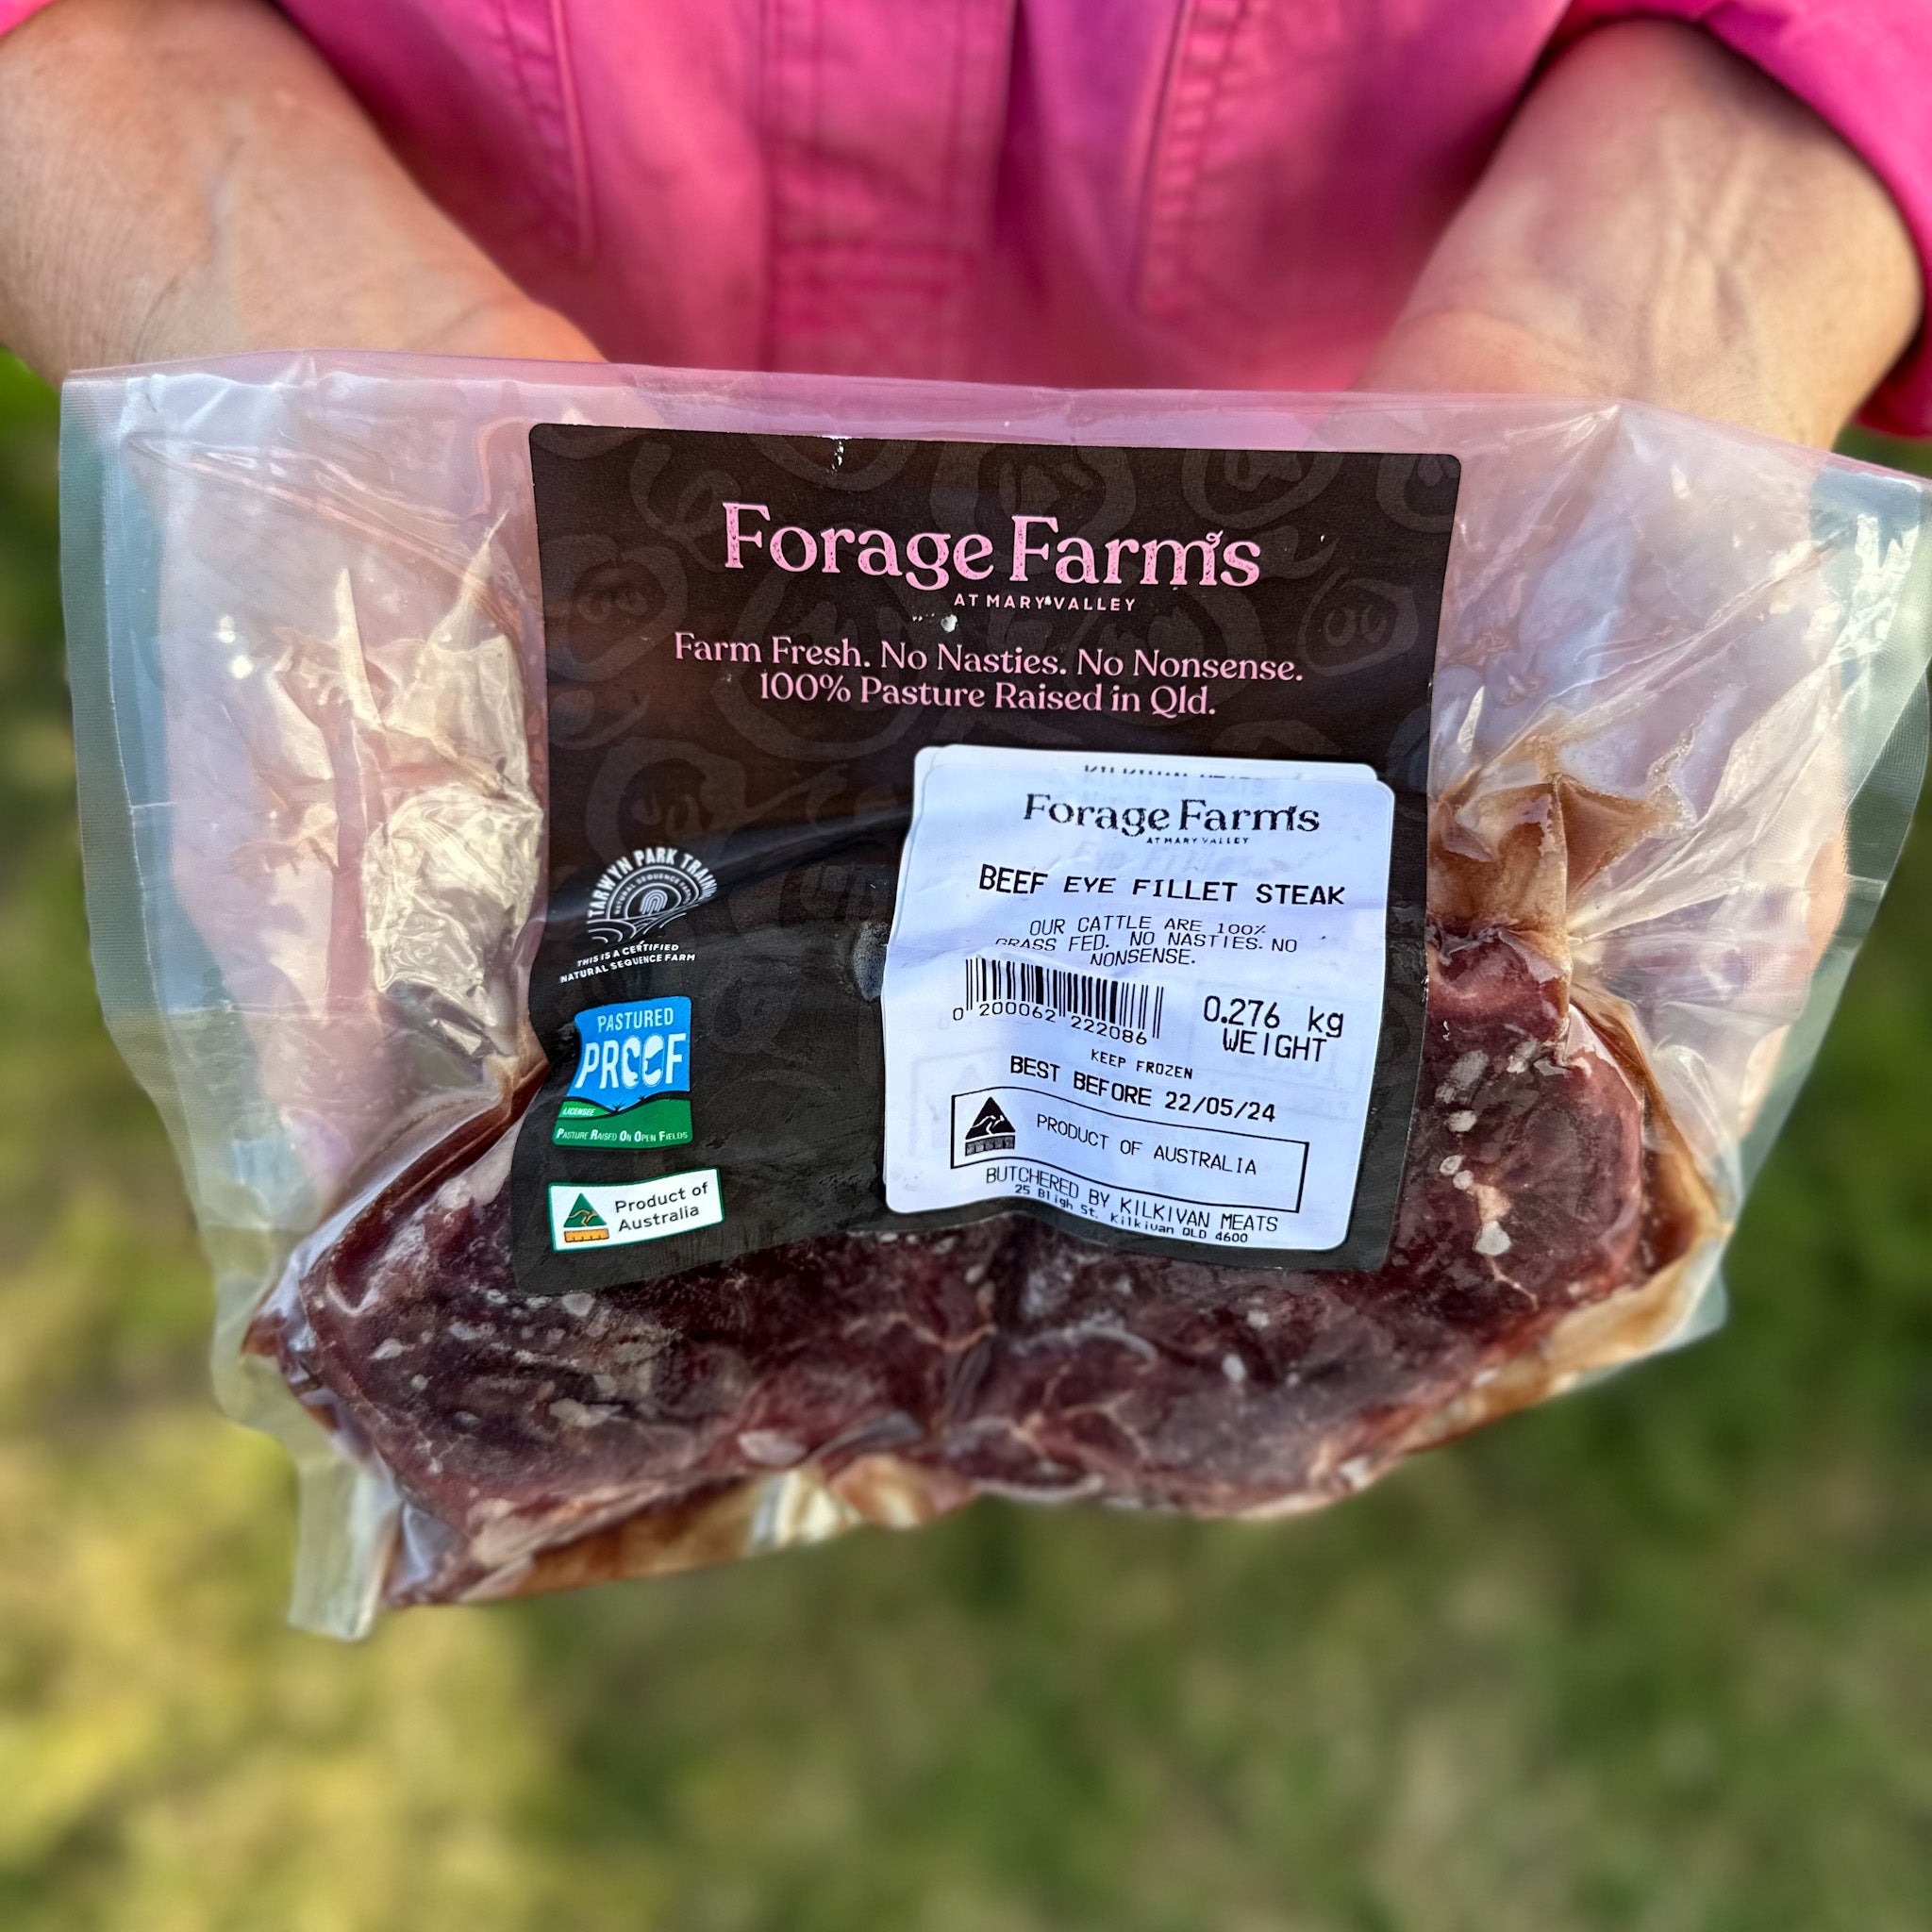 Forage Farms Grass Fed & Finished Beef Eye Fillet Steak